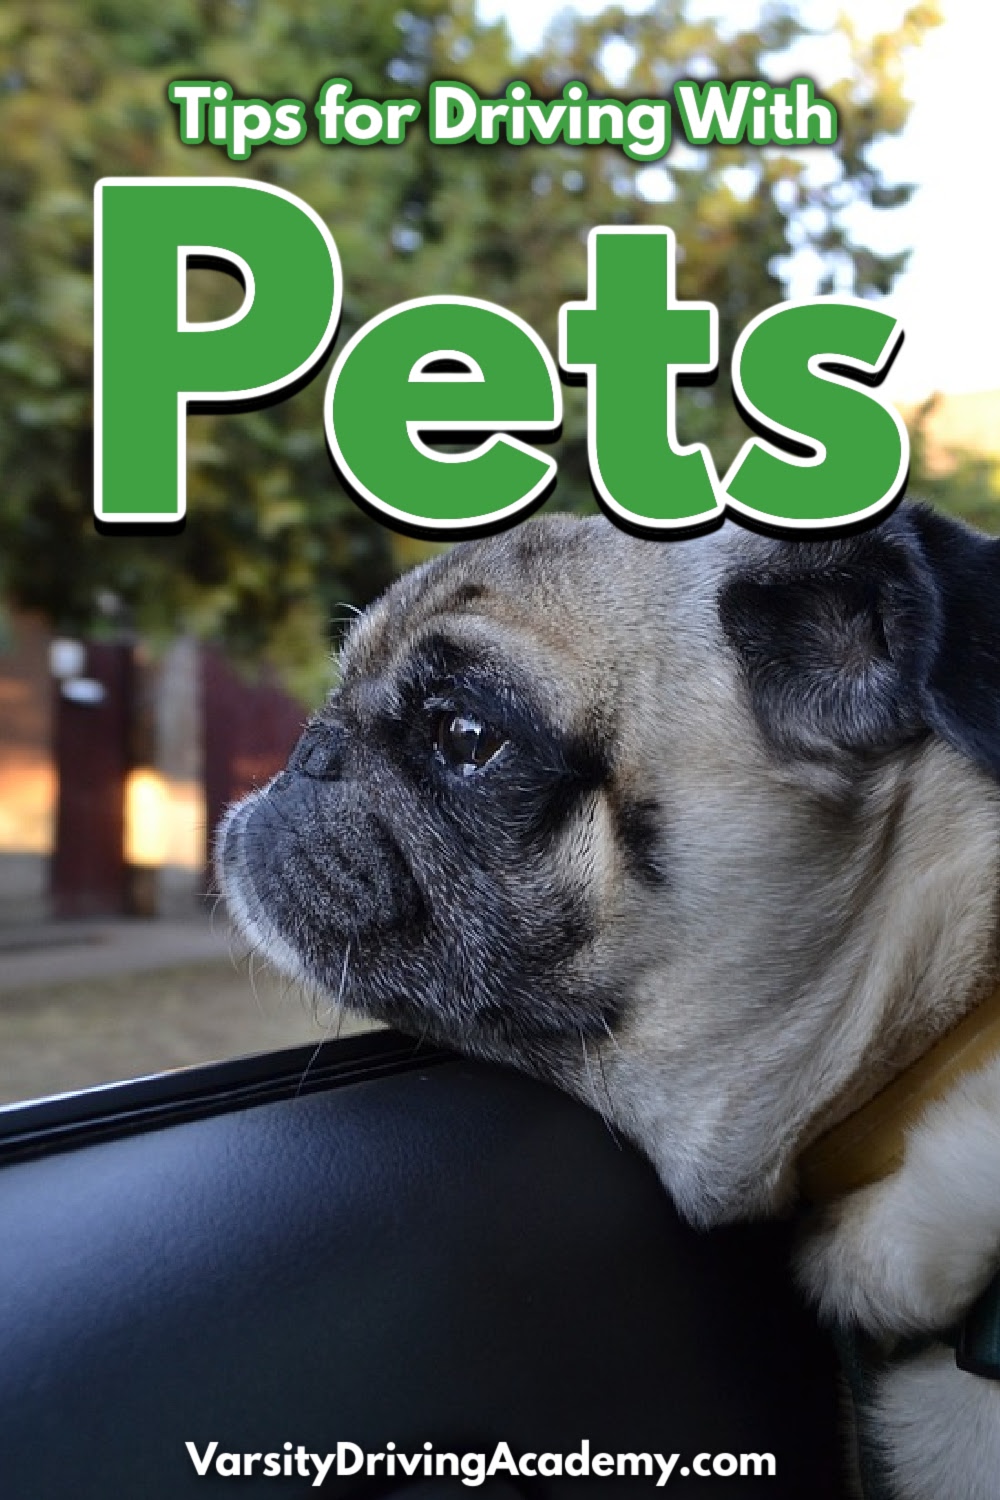 Use tips for driving with pets to make sure that you don’t run into any safety issues when you need to take your best friend with you.